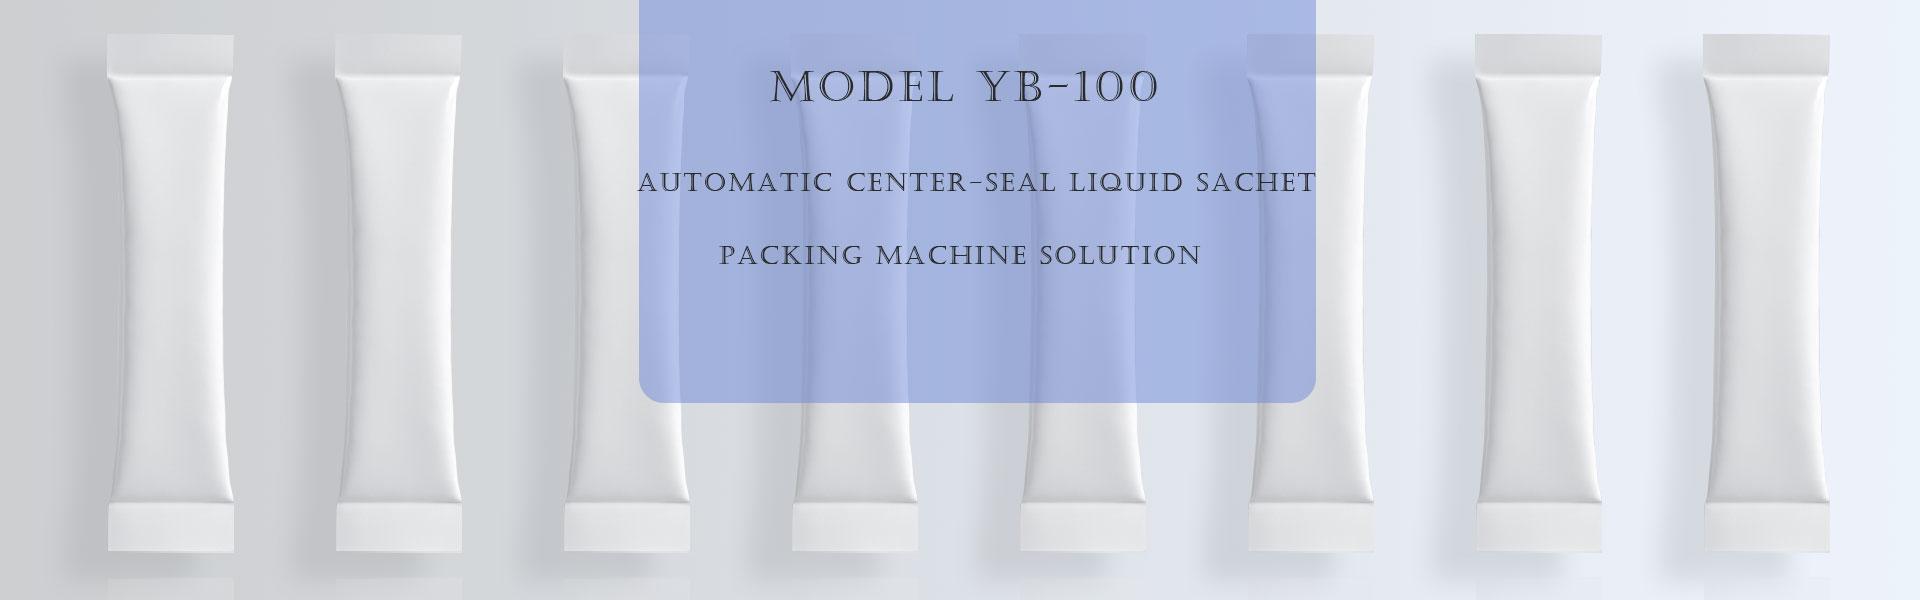 Solution-Pack | Automatic Center-Seal Liquid Sachet Packing Machine | Back Seal Sachet Packing Machine | Liquid Filling Sealing Machine | Ketchup Sachet Packing Machine | Honey Sachet Packing Machine